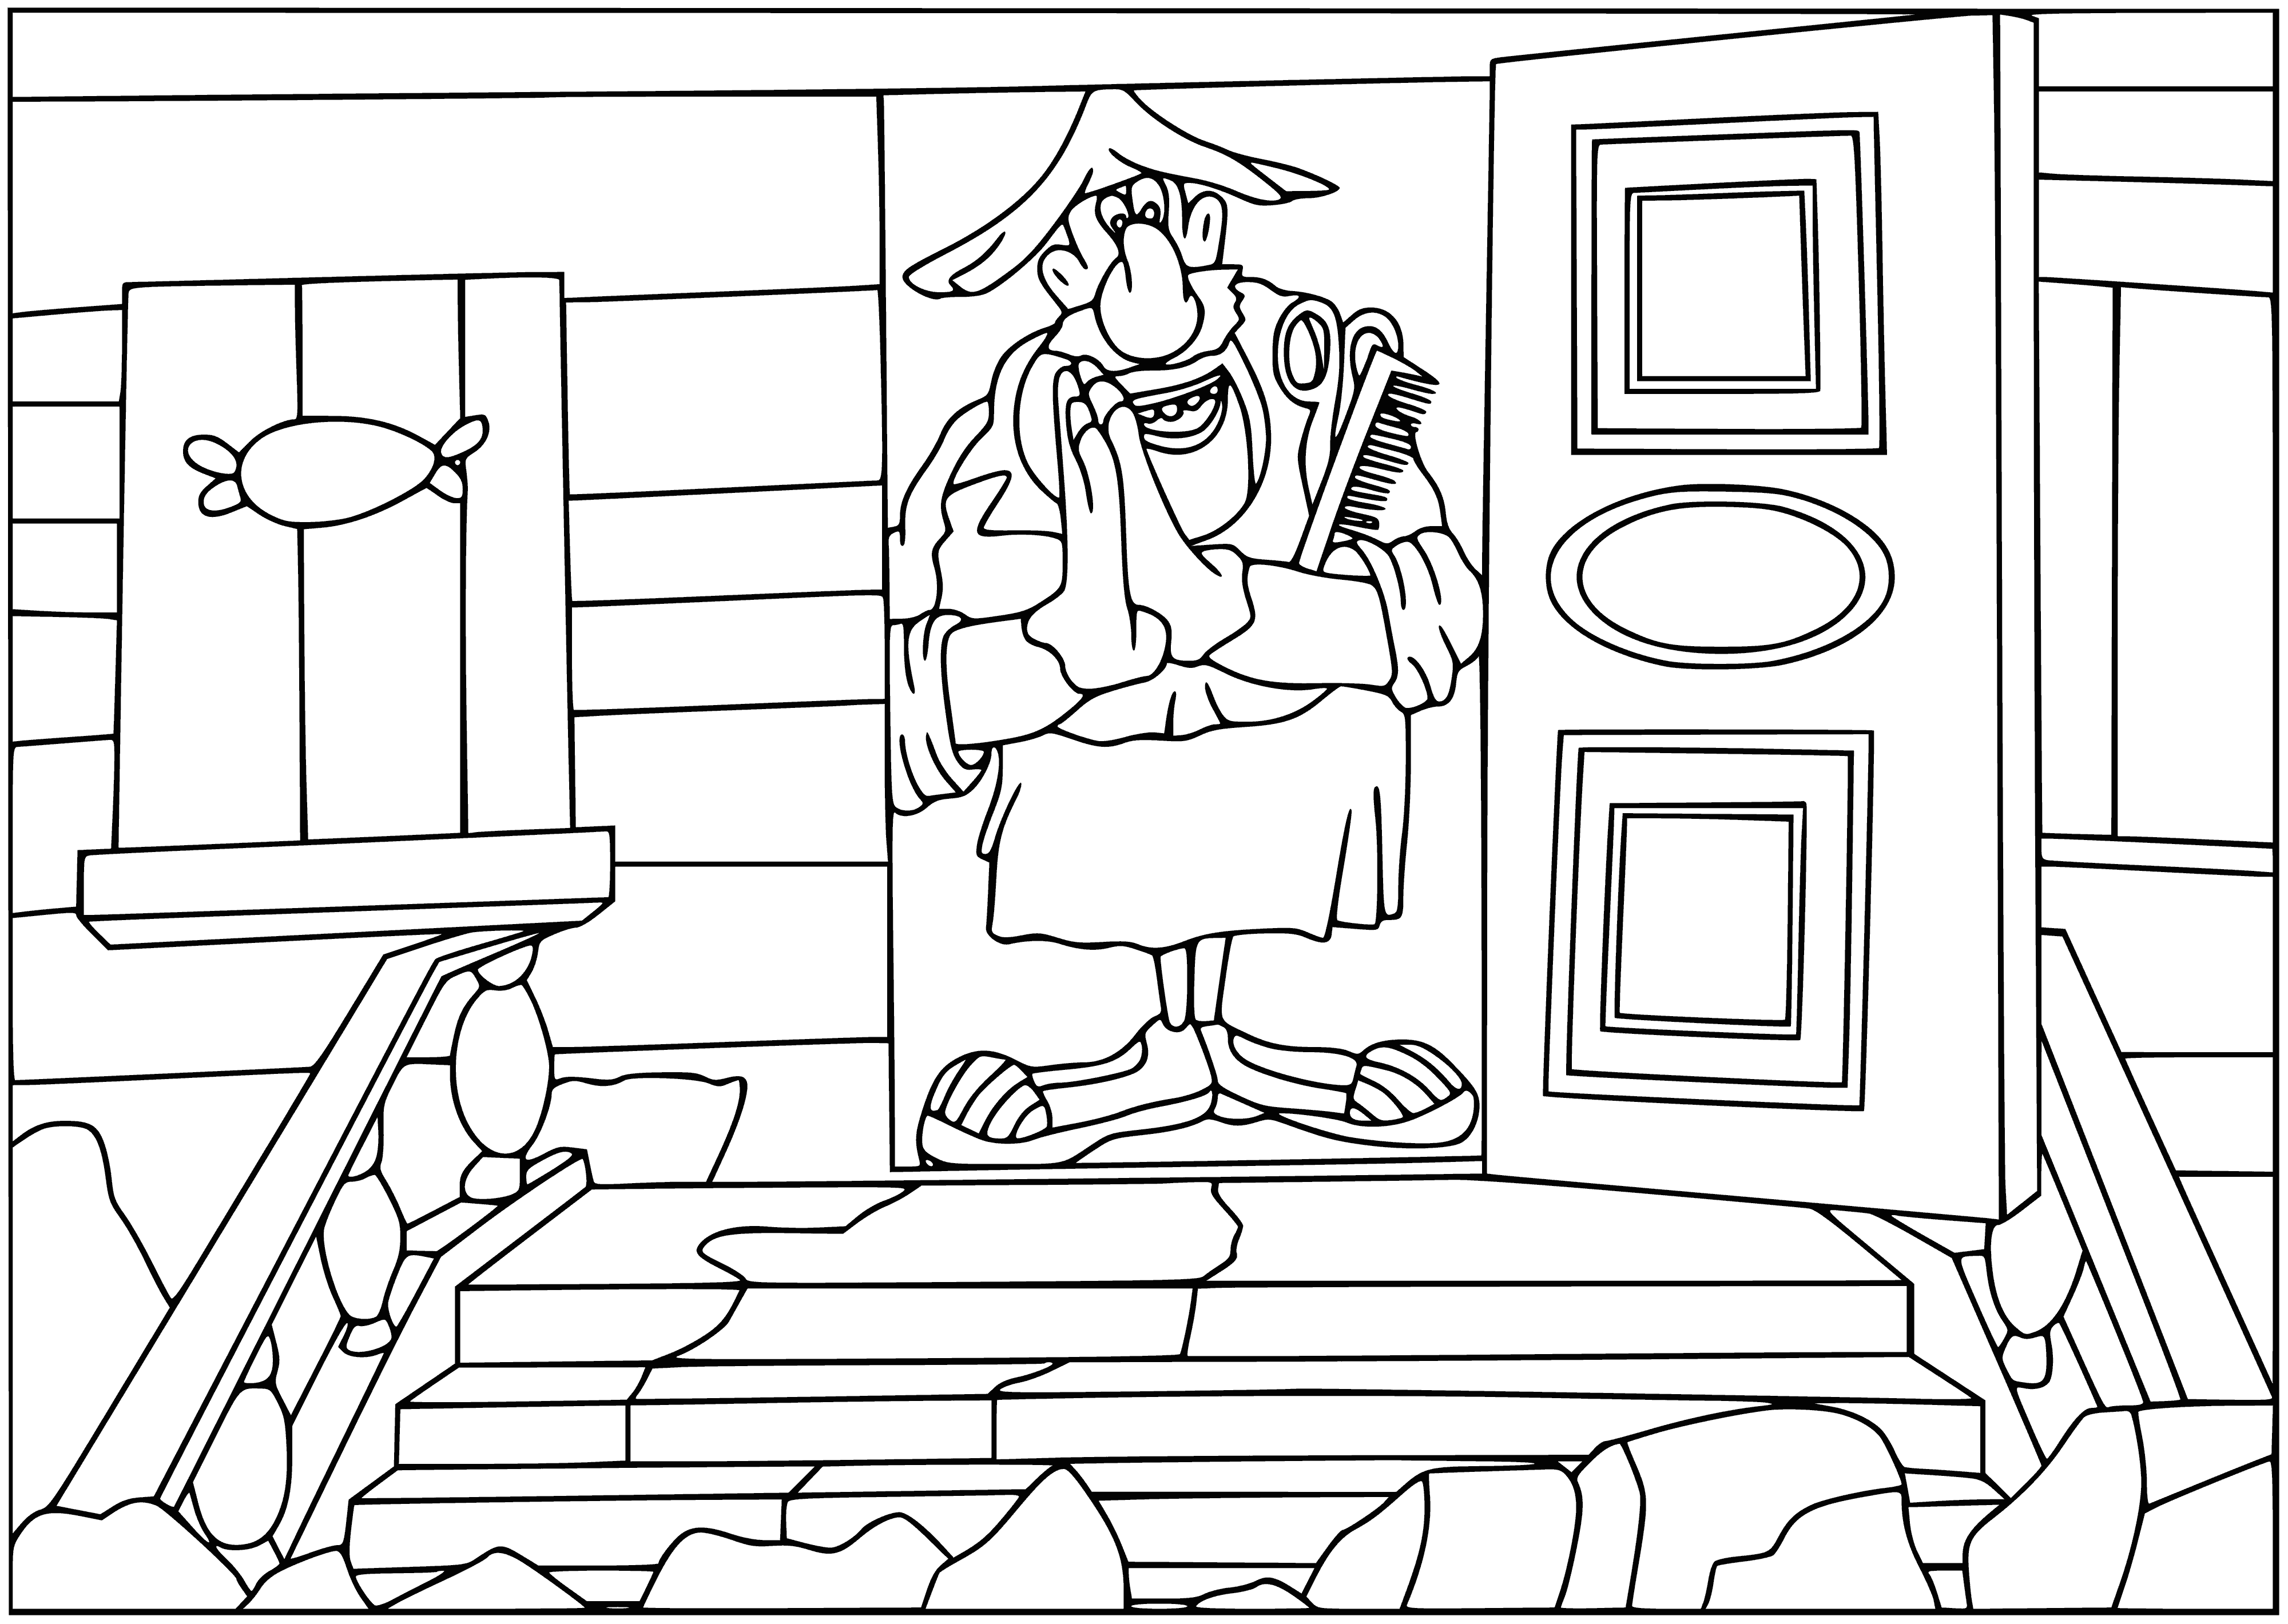 coloring page: Captain Vrungel sails the seas on an adventurous journey with a brave crew facing storms, trying to keep their ship from harm.